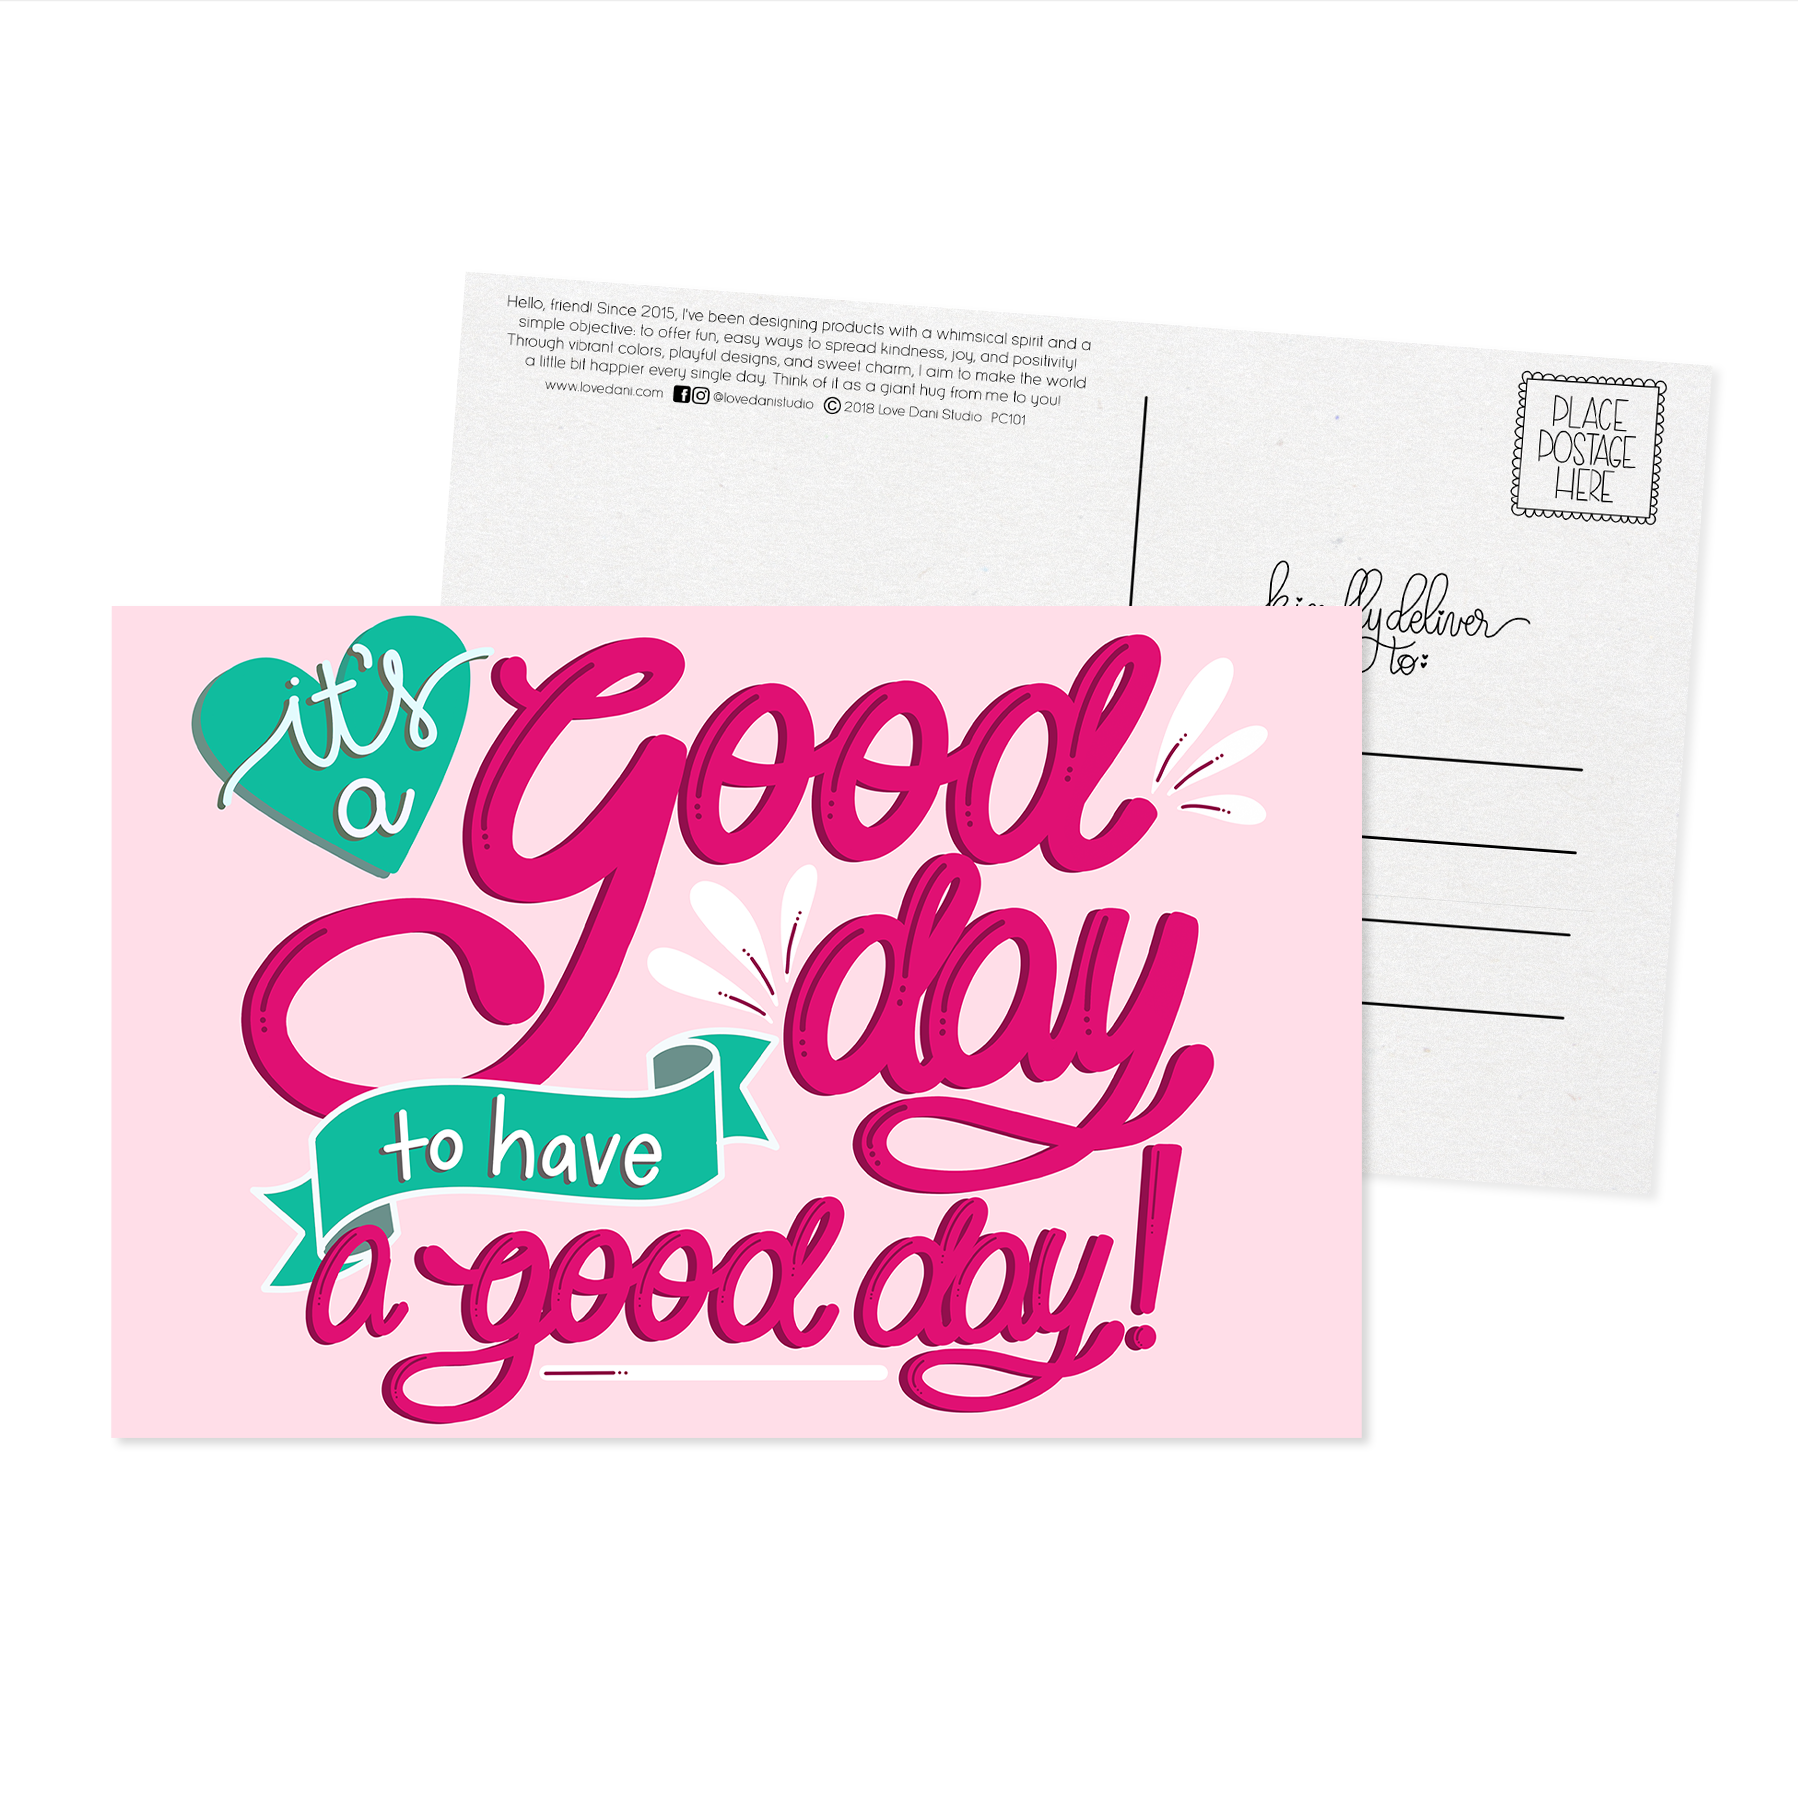 It's a Good Day to Have a Good Day - Postcard